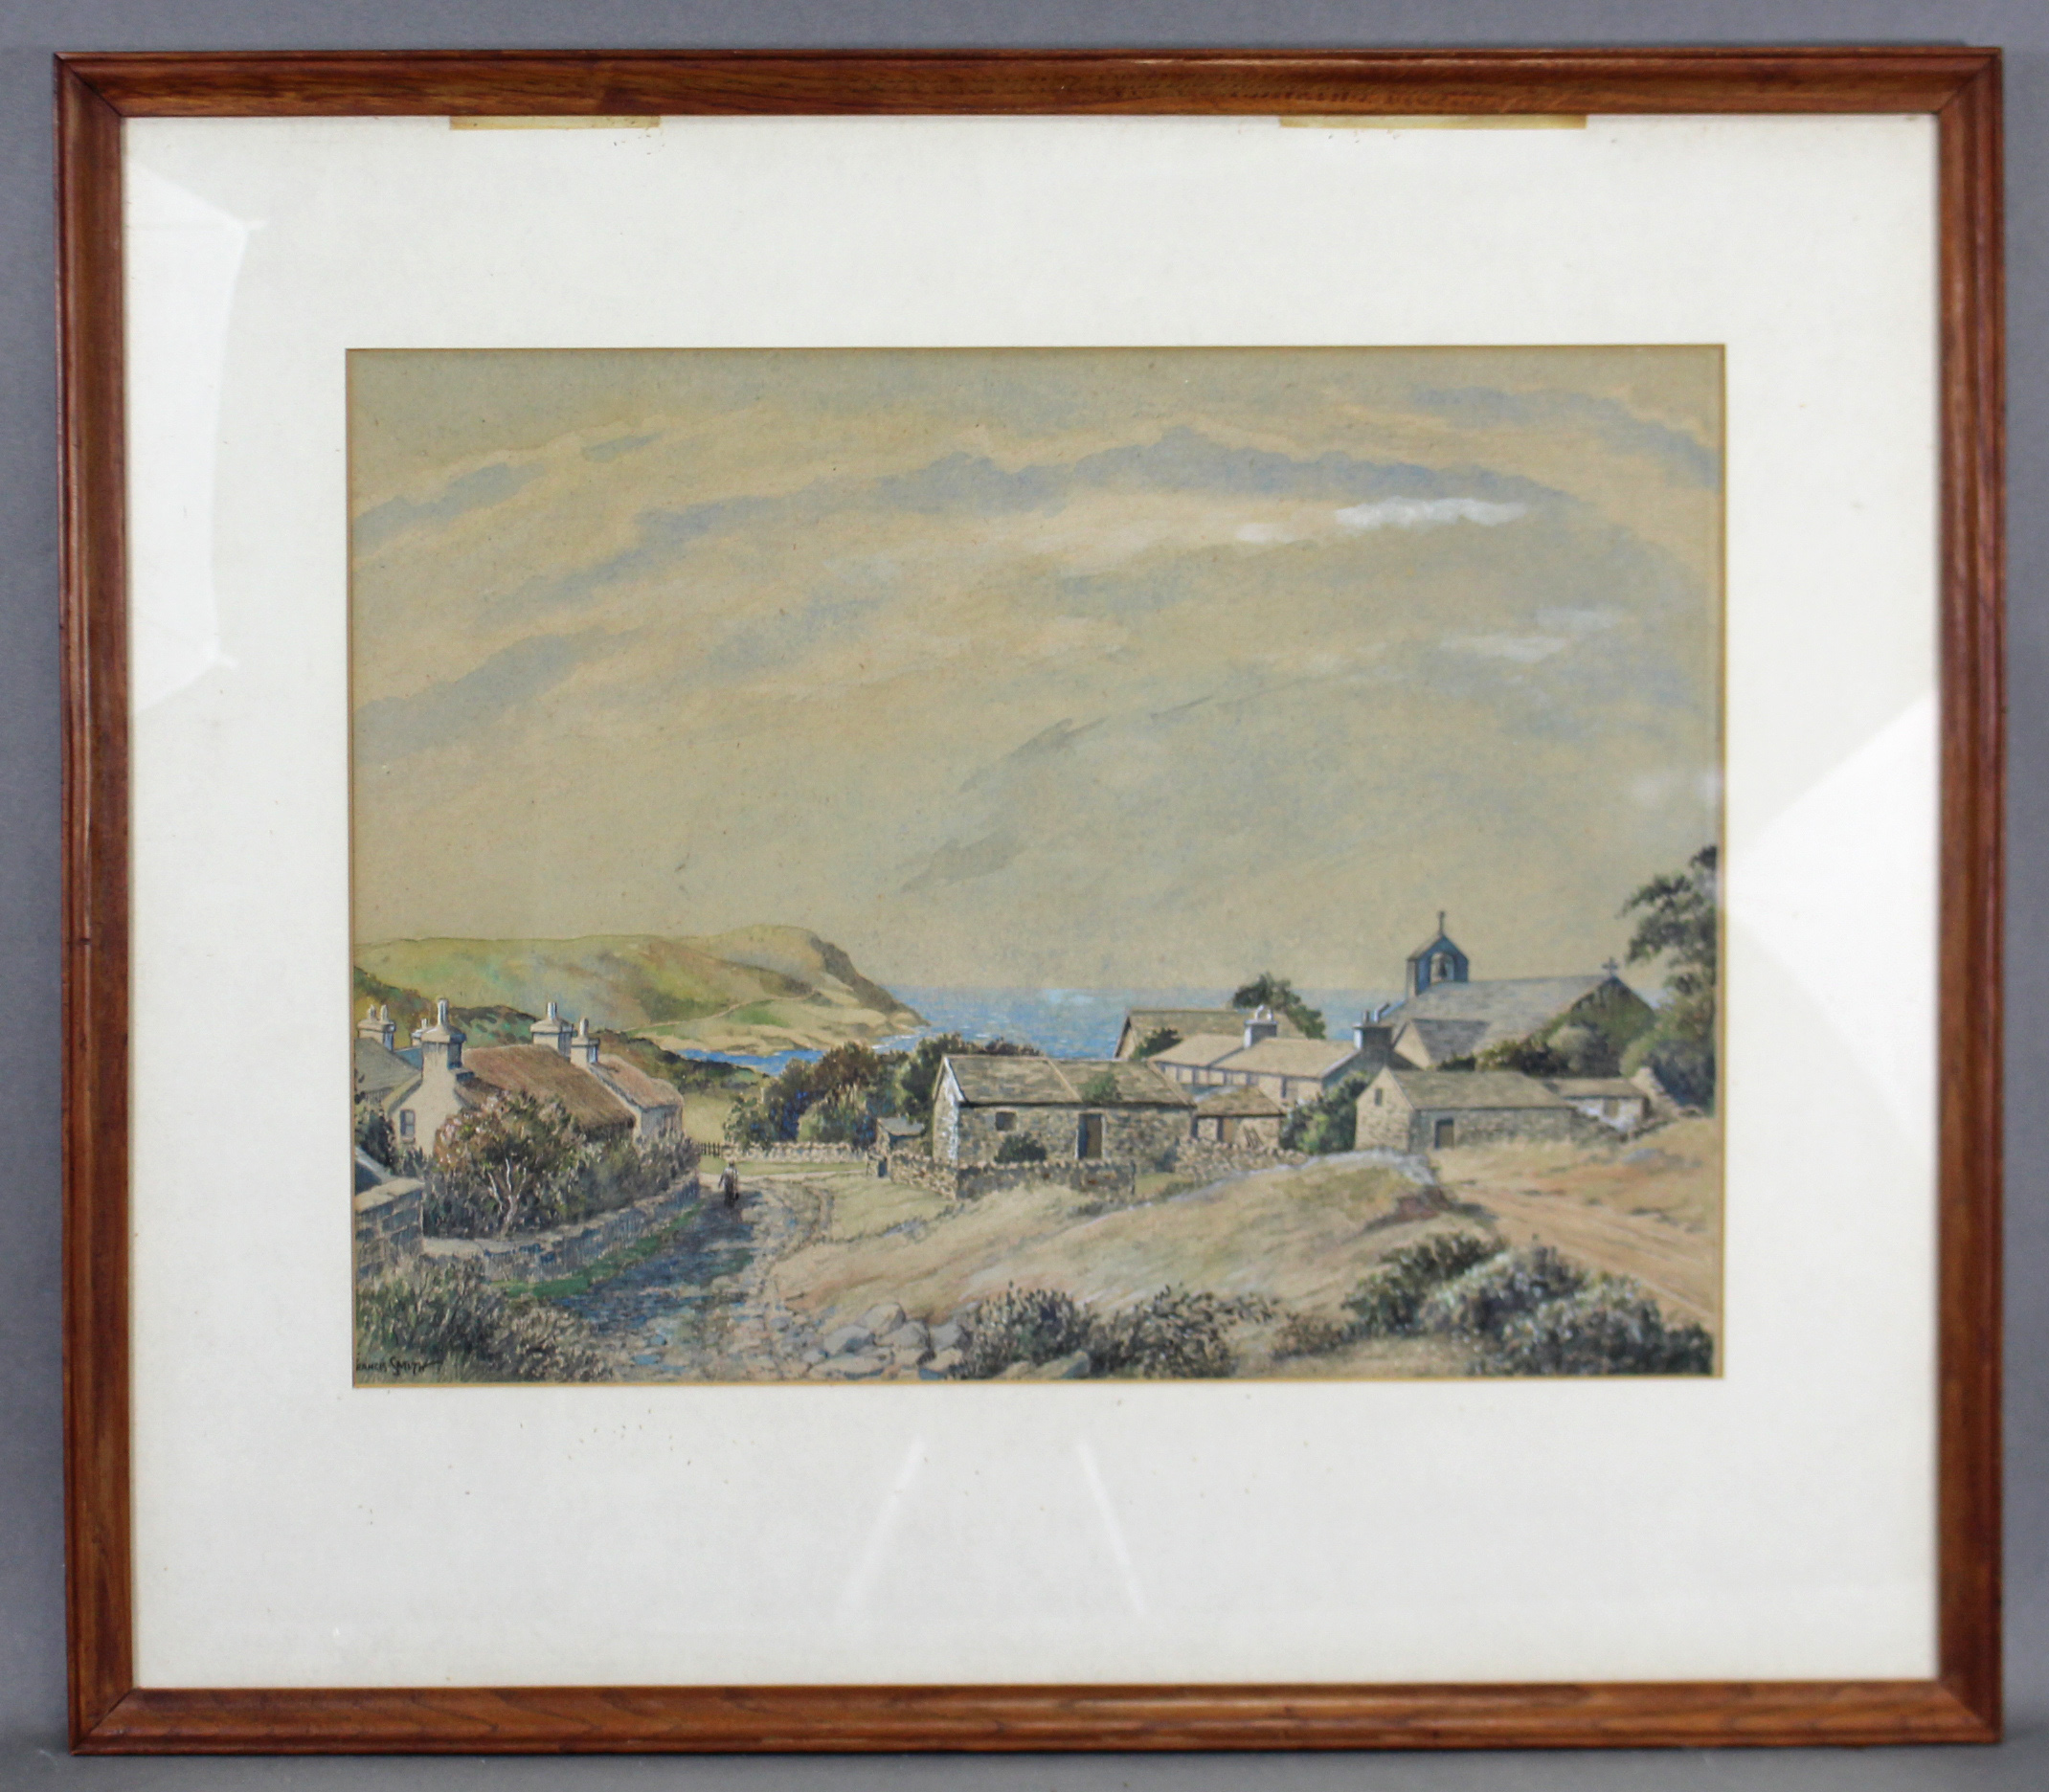 JOHN FRANCIS SMITH (b. 1888) “Calf Island & Cregneish, Isle of Man”. A clifftop village with - Image 3 of 7